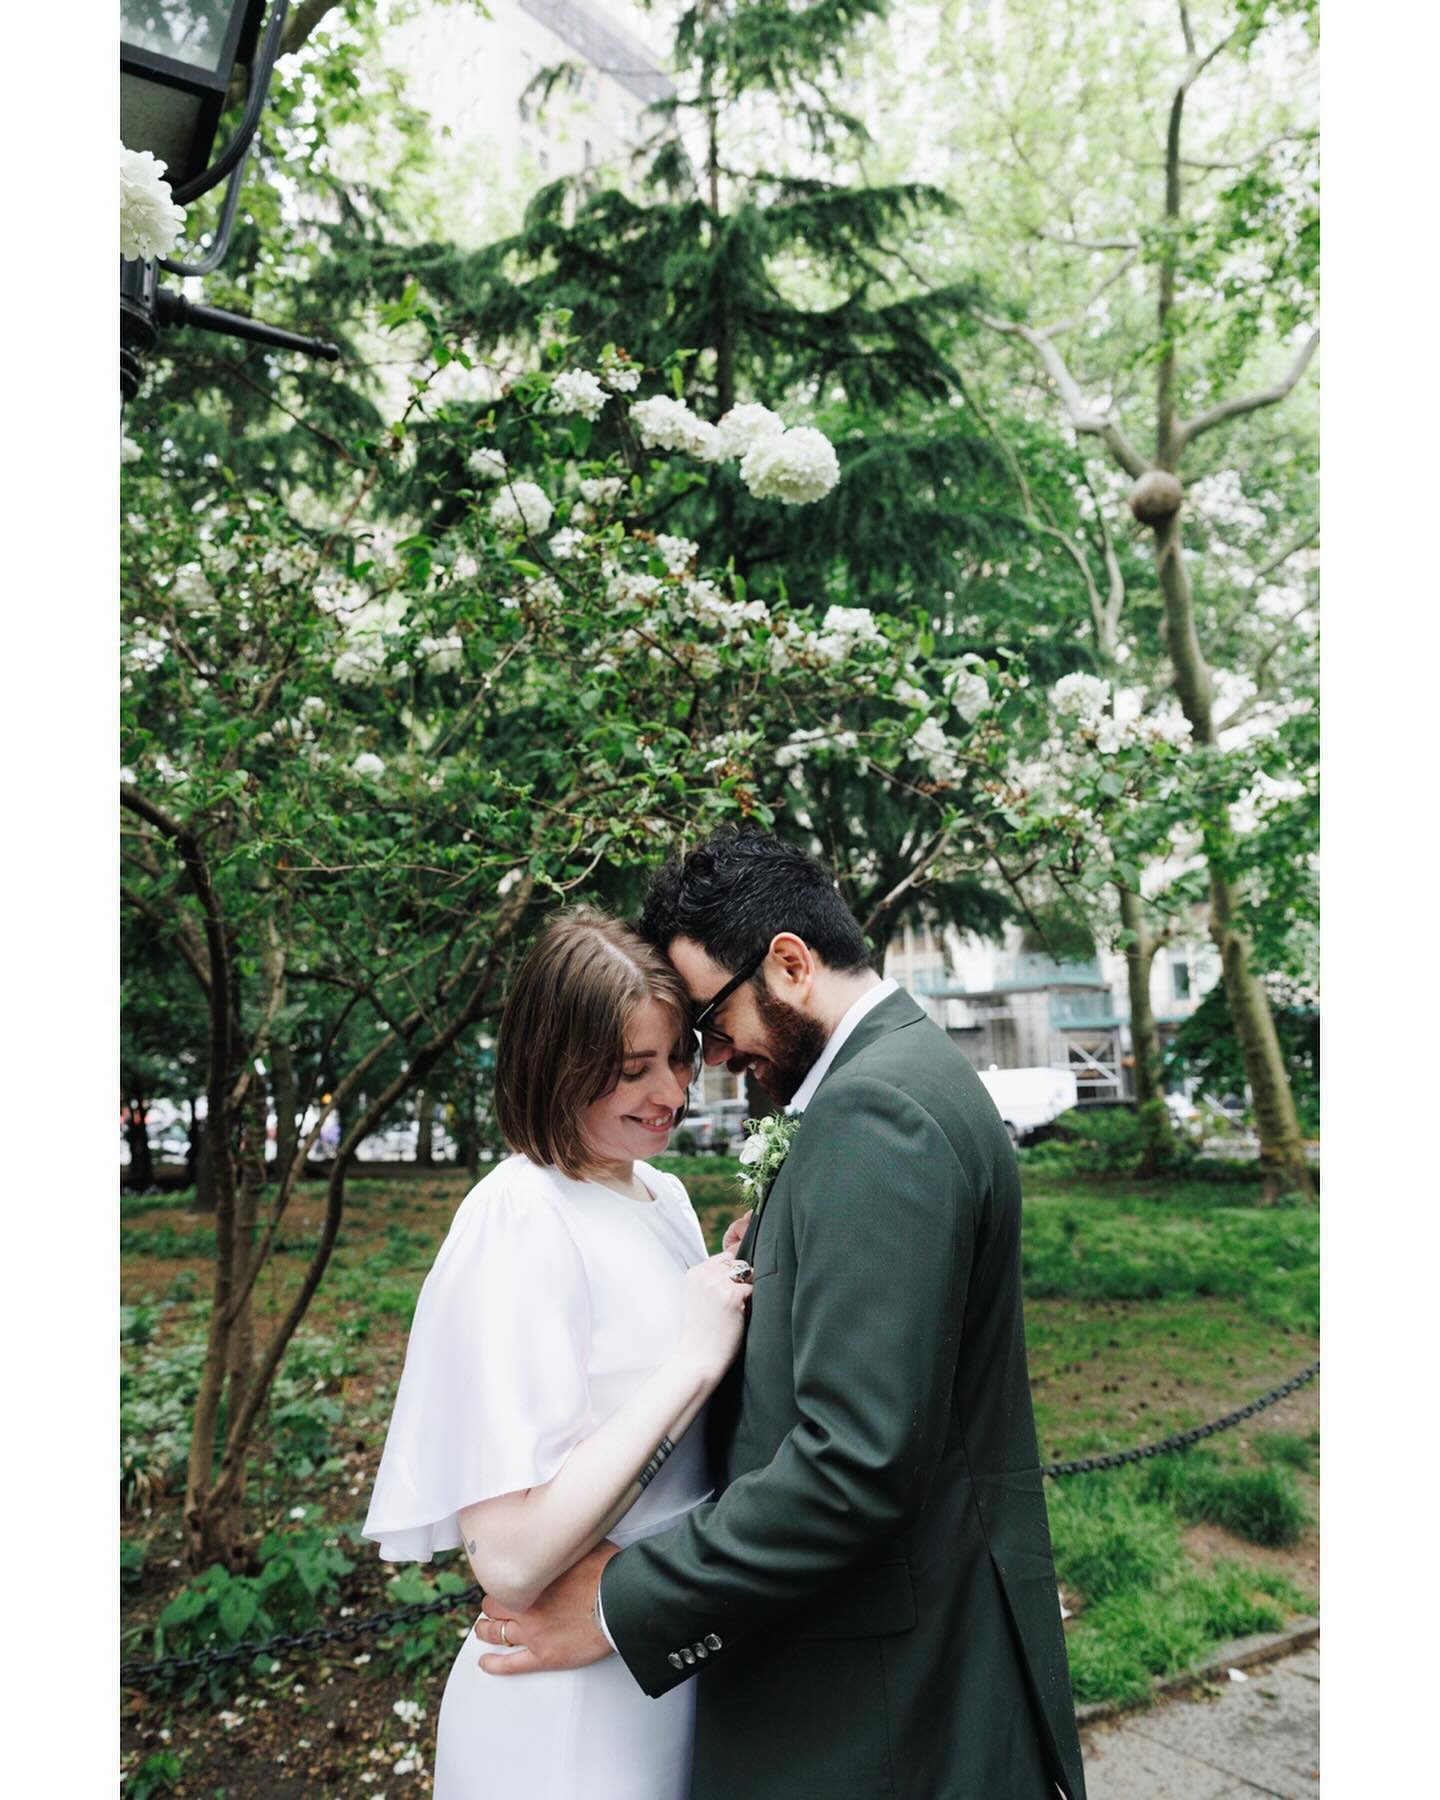 High School Sweethearts x A Rainy City Hall Morning = Magic☂️💕

&quot;ERICA!!!! We love these so much!! Thank you for being there to capture our special day. It was exactly what we hoped for - and you captured it perfectly. 

We can't thank you enou